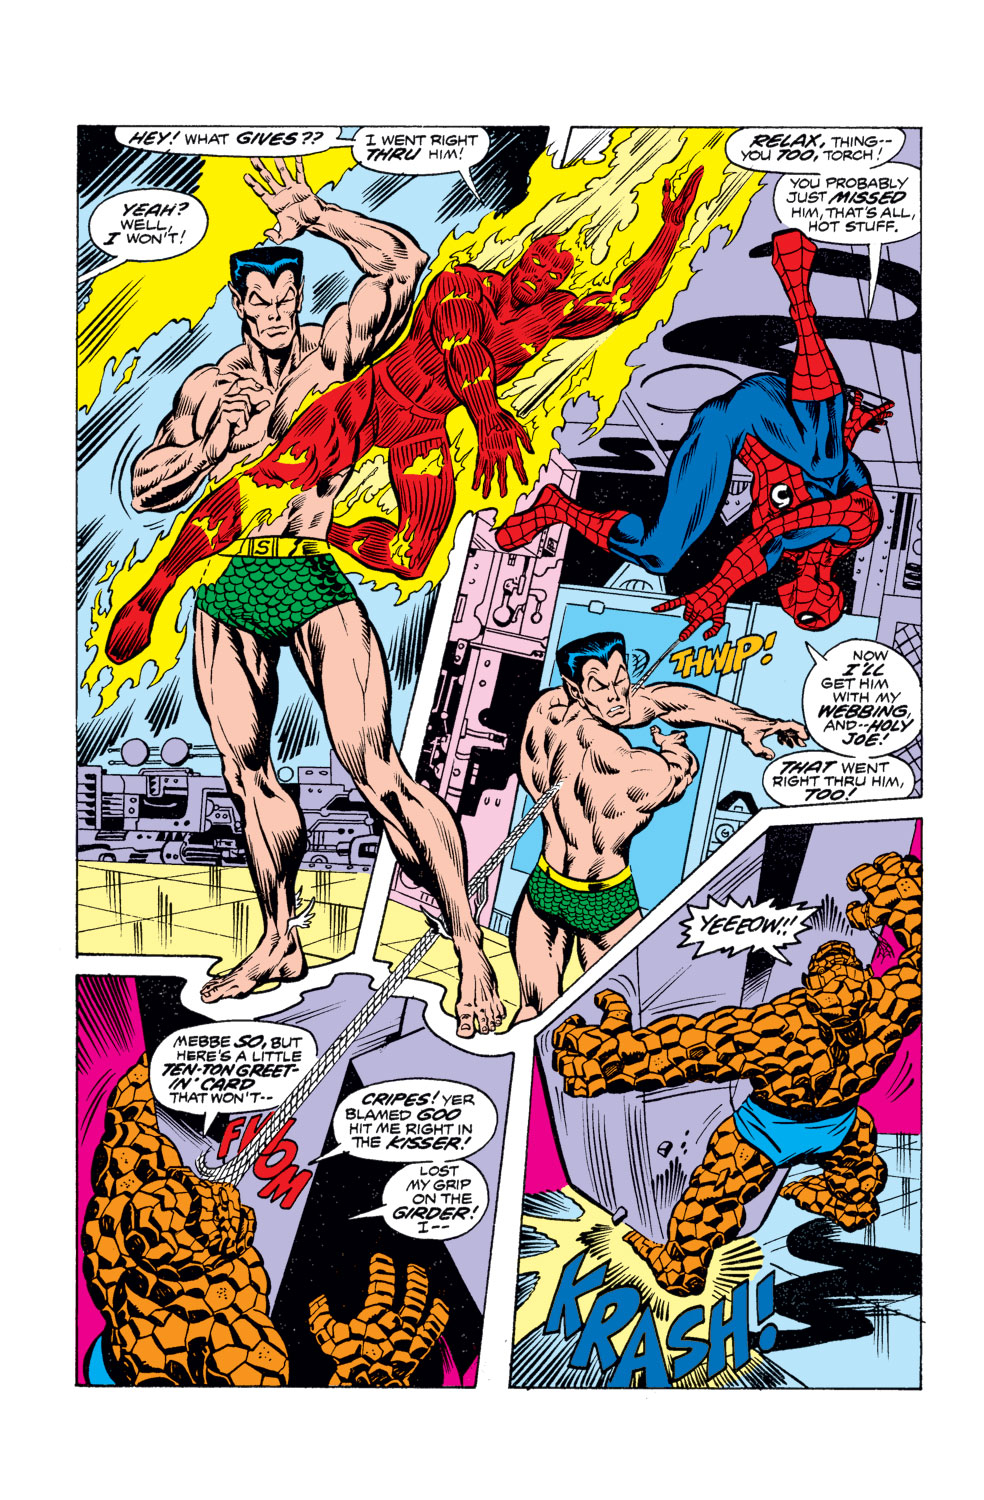 What If? (1977) issue 1 - Spider-Man joined the Fantastic Four - Page 22